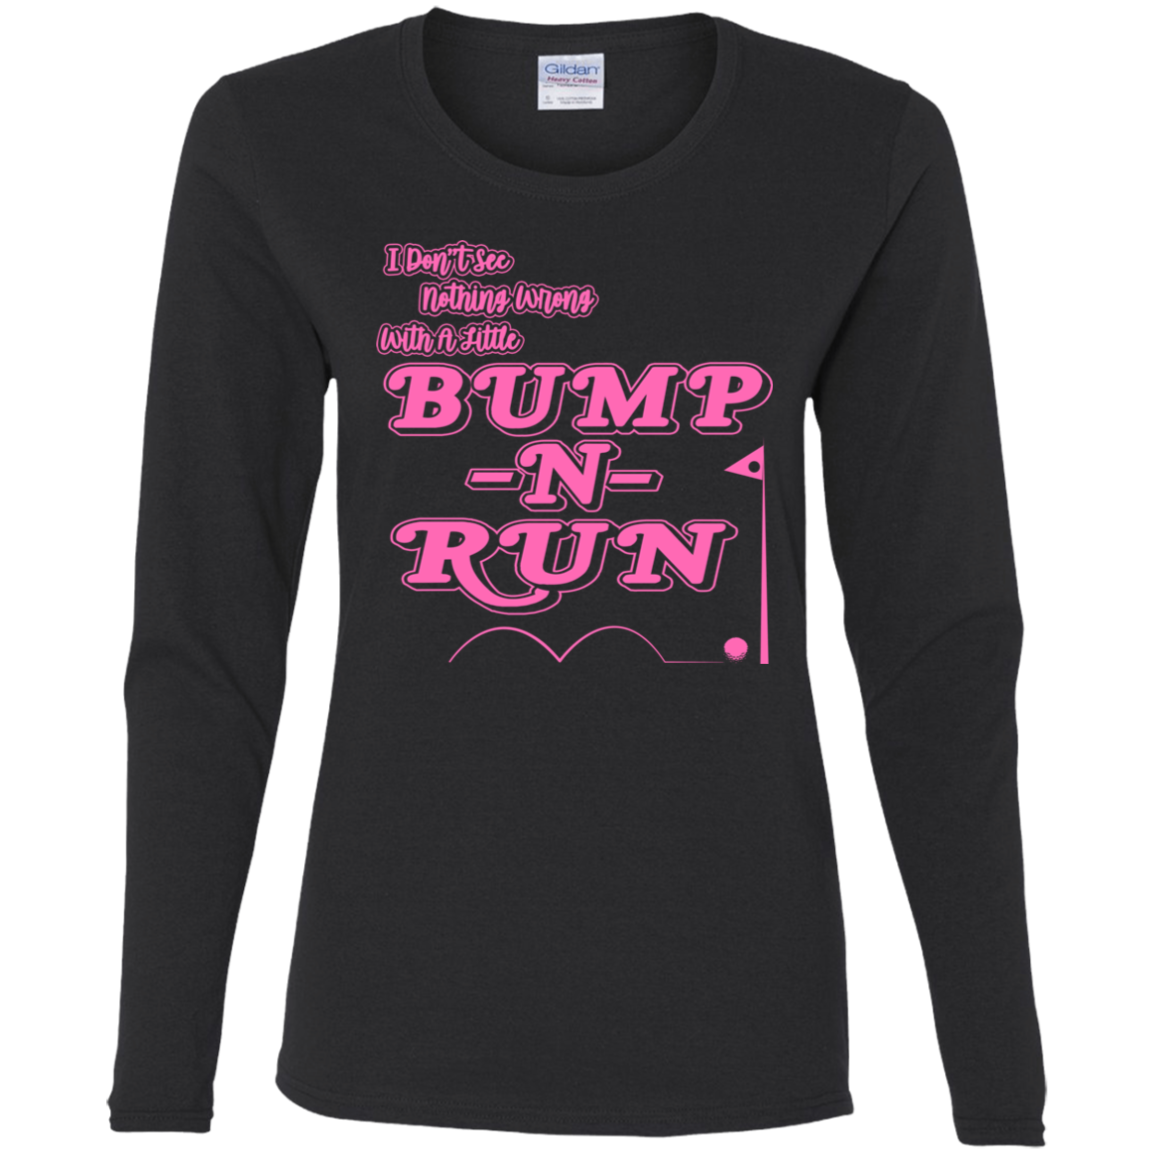 OPG Custom Design #4. I Don't See Noting Wrong With A Little Bump N Run. Ladies' 100% Cotton T-Shirt